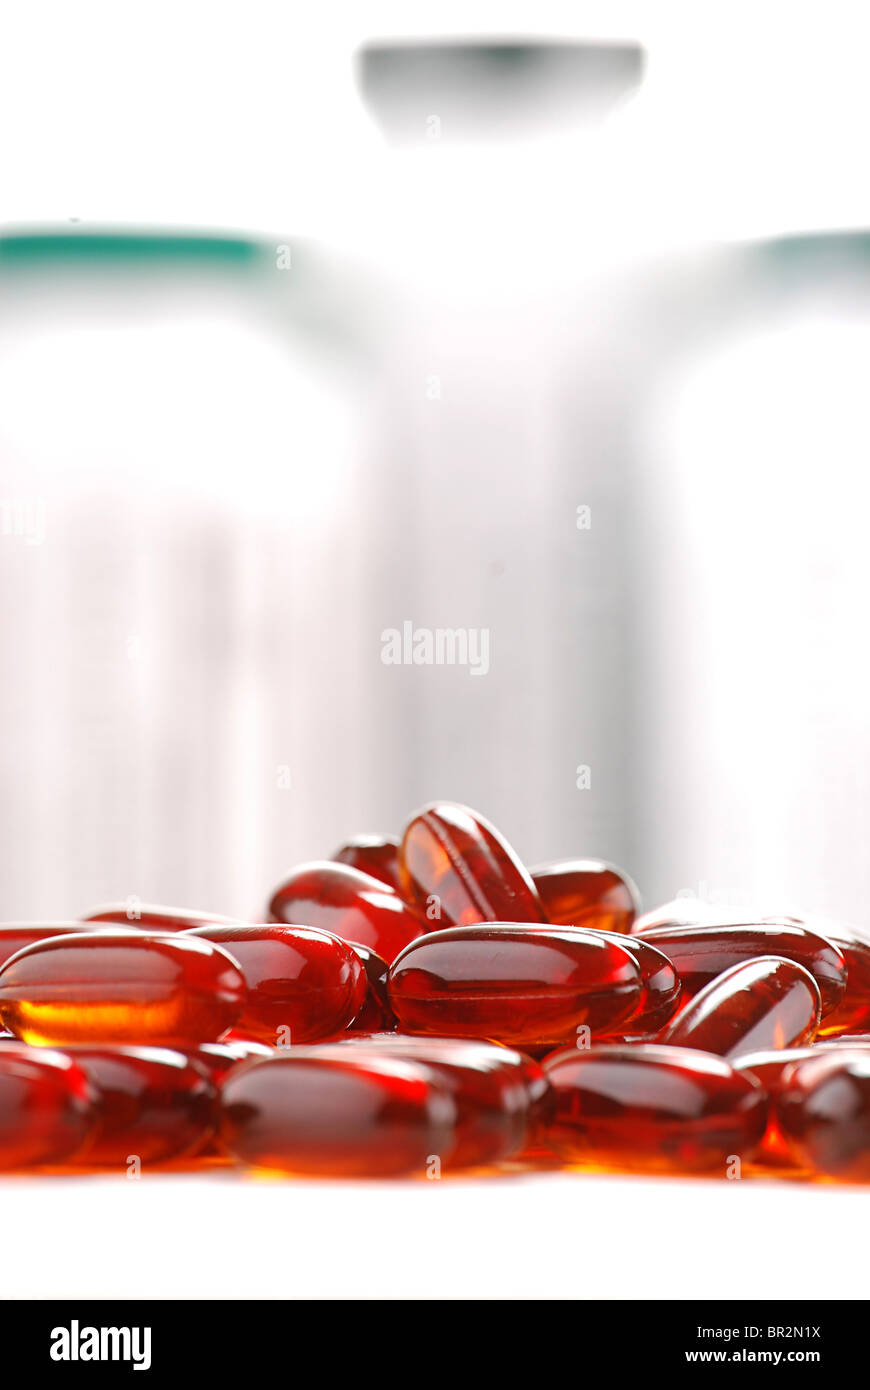 Composition with capsules of dietary supplements and containers Stock Photo